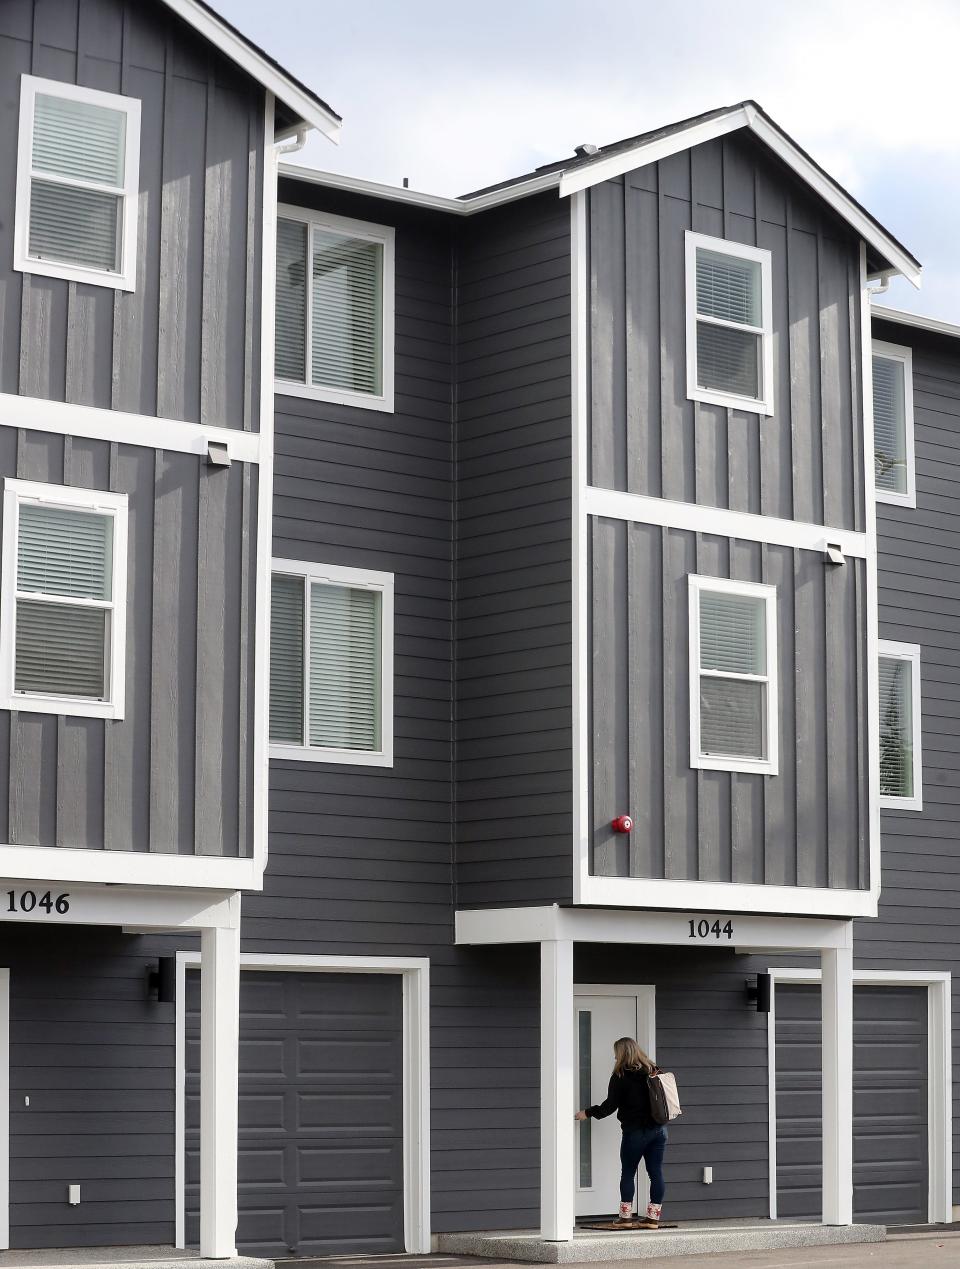 Jennifer Lang, director of marketing at Harbor Custom Development Inc., leaves one of the furnished townhomes at Mills Crossing in Bremerton on Nov. 1.